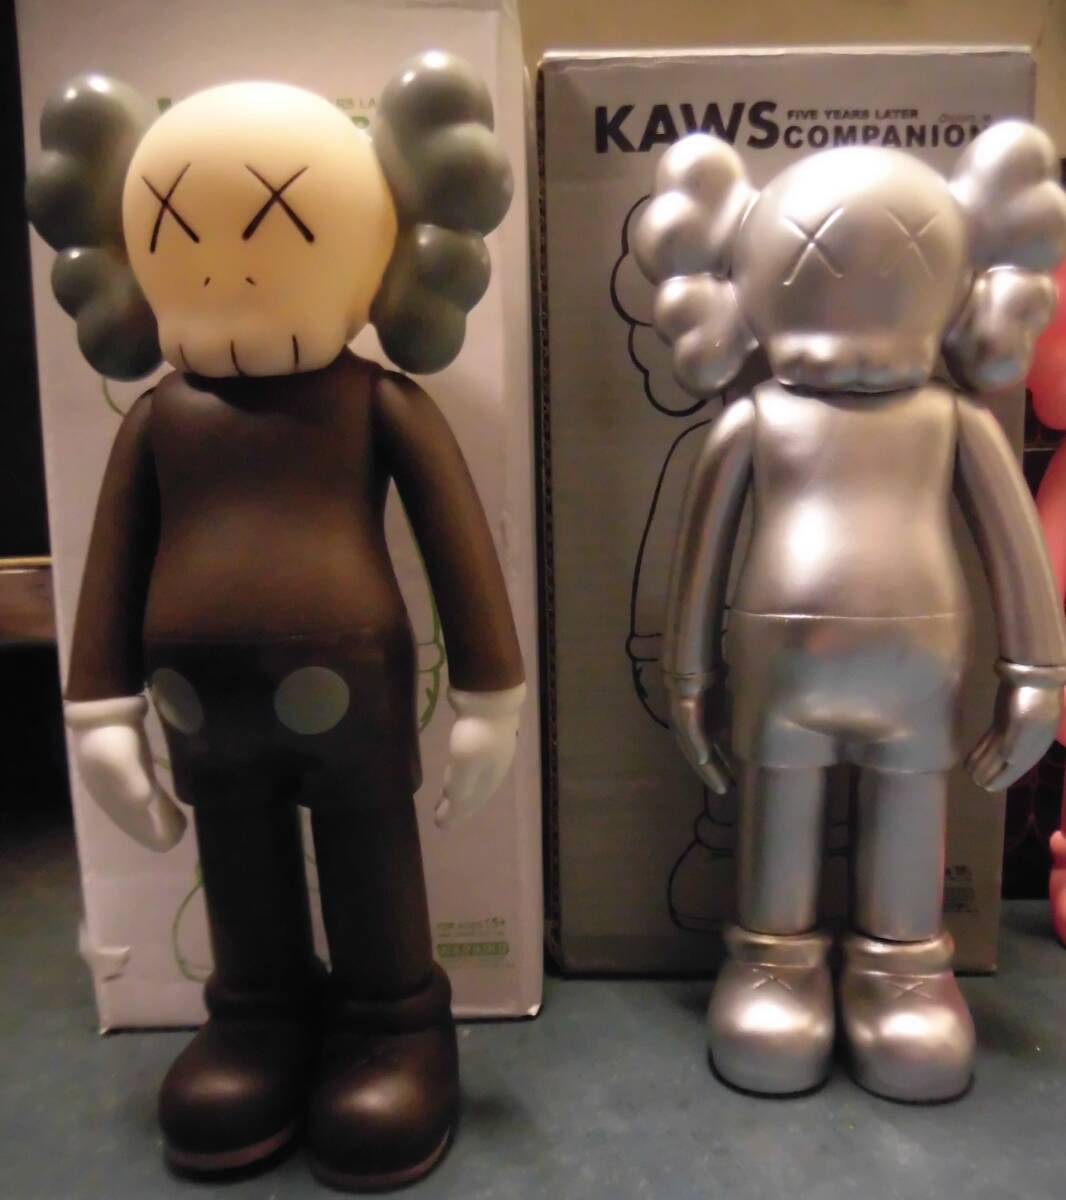 1 jpy start selling out companion f Ray open edition 4 color Kaws meti com toy height :20cm about J581